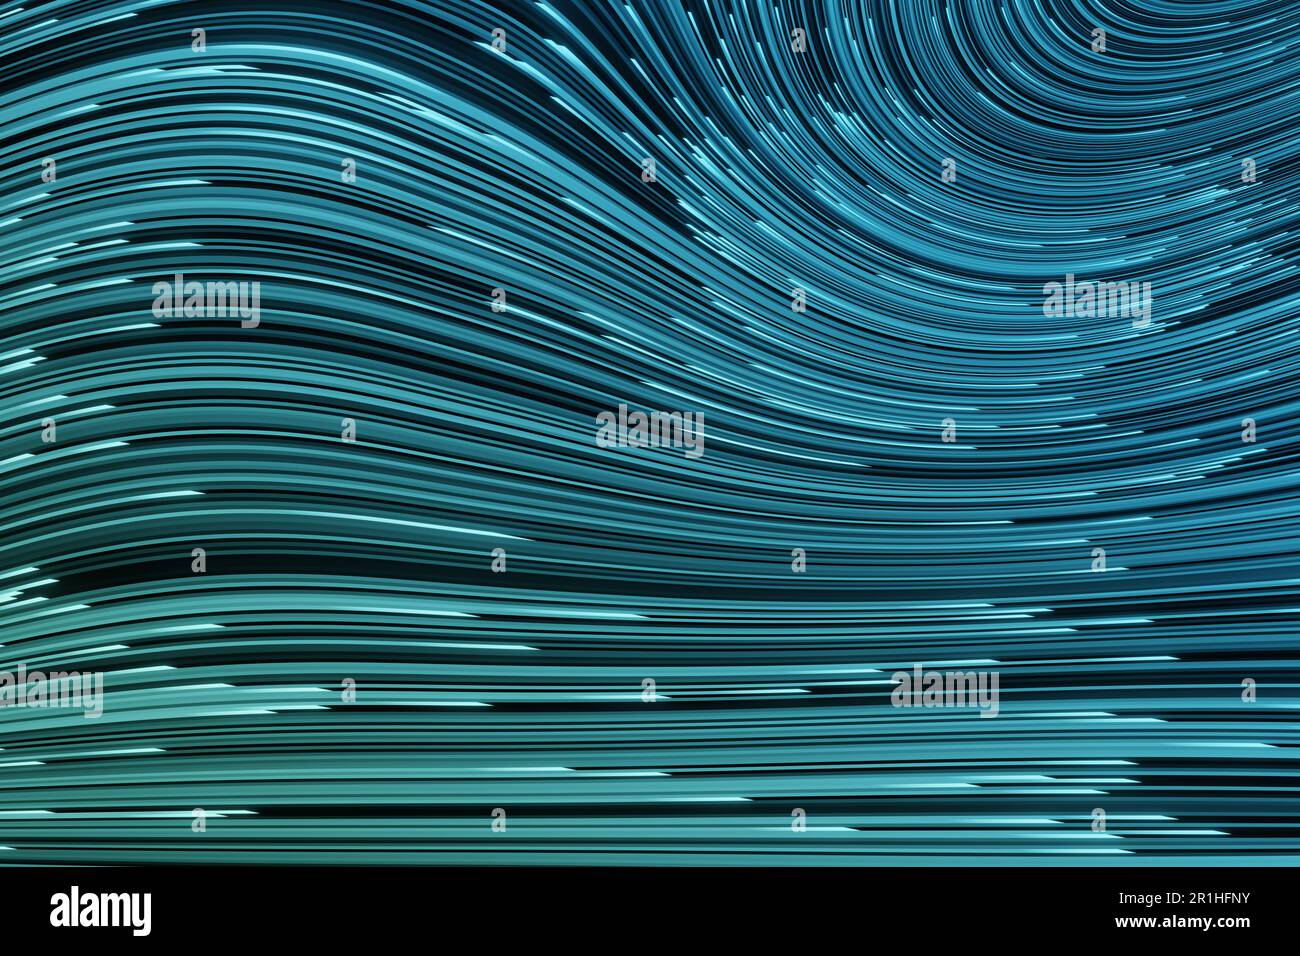 Blue and cyan neon light streaks with brighter ends flowing across the screen.Design element for web design backgrounds and slide show wallpapers Stock Photo